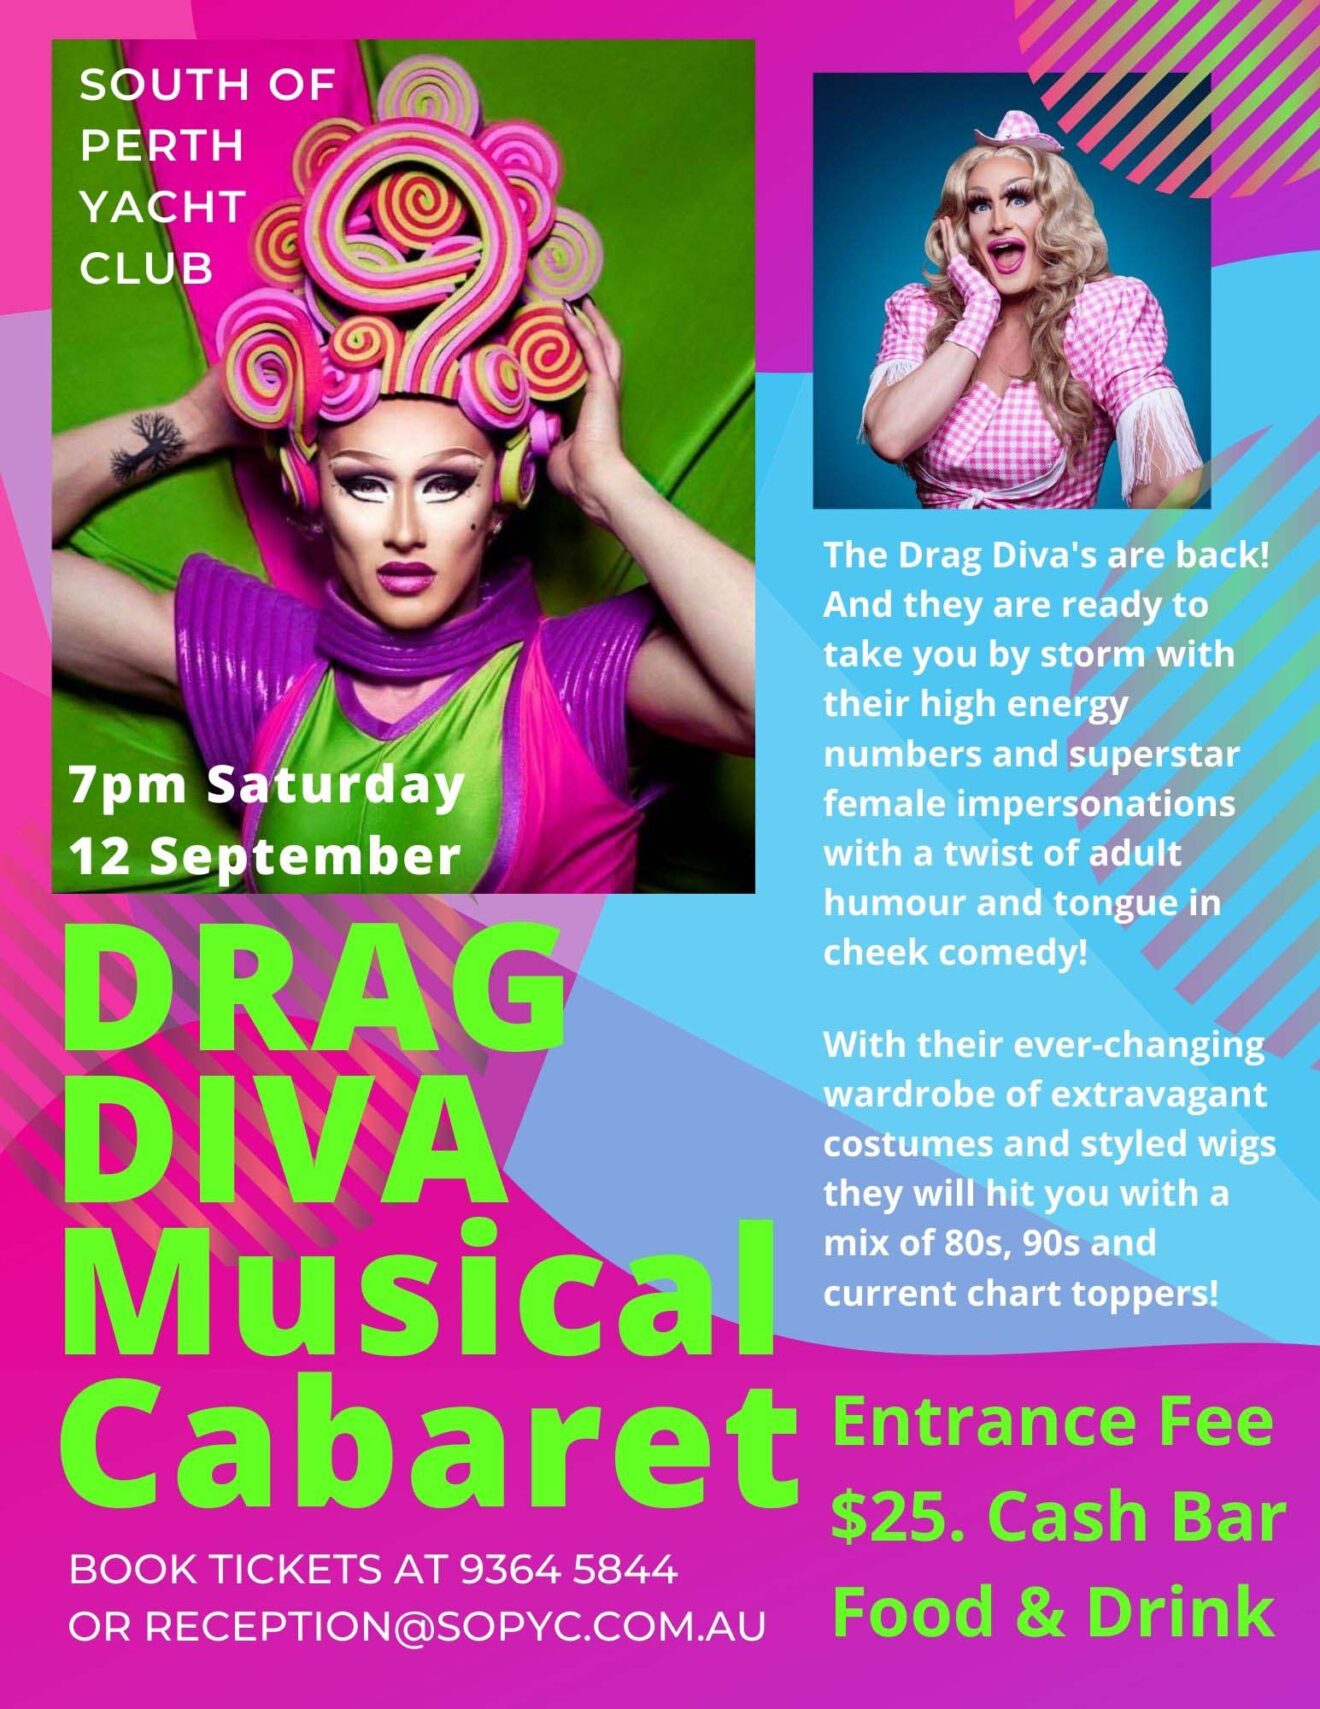 The Drag Diva's are here on Saturday - last chance for tickets!!